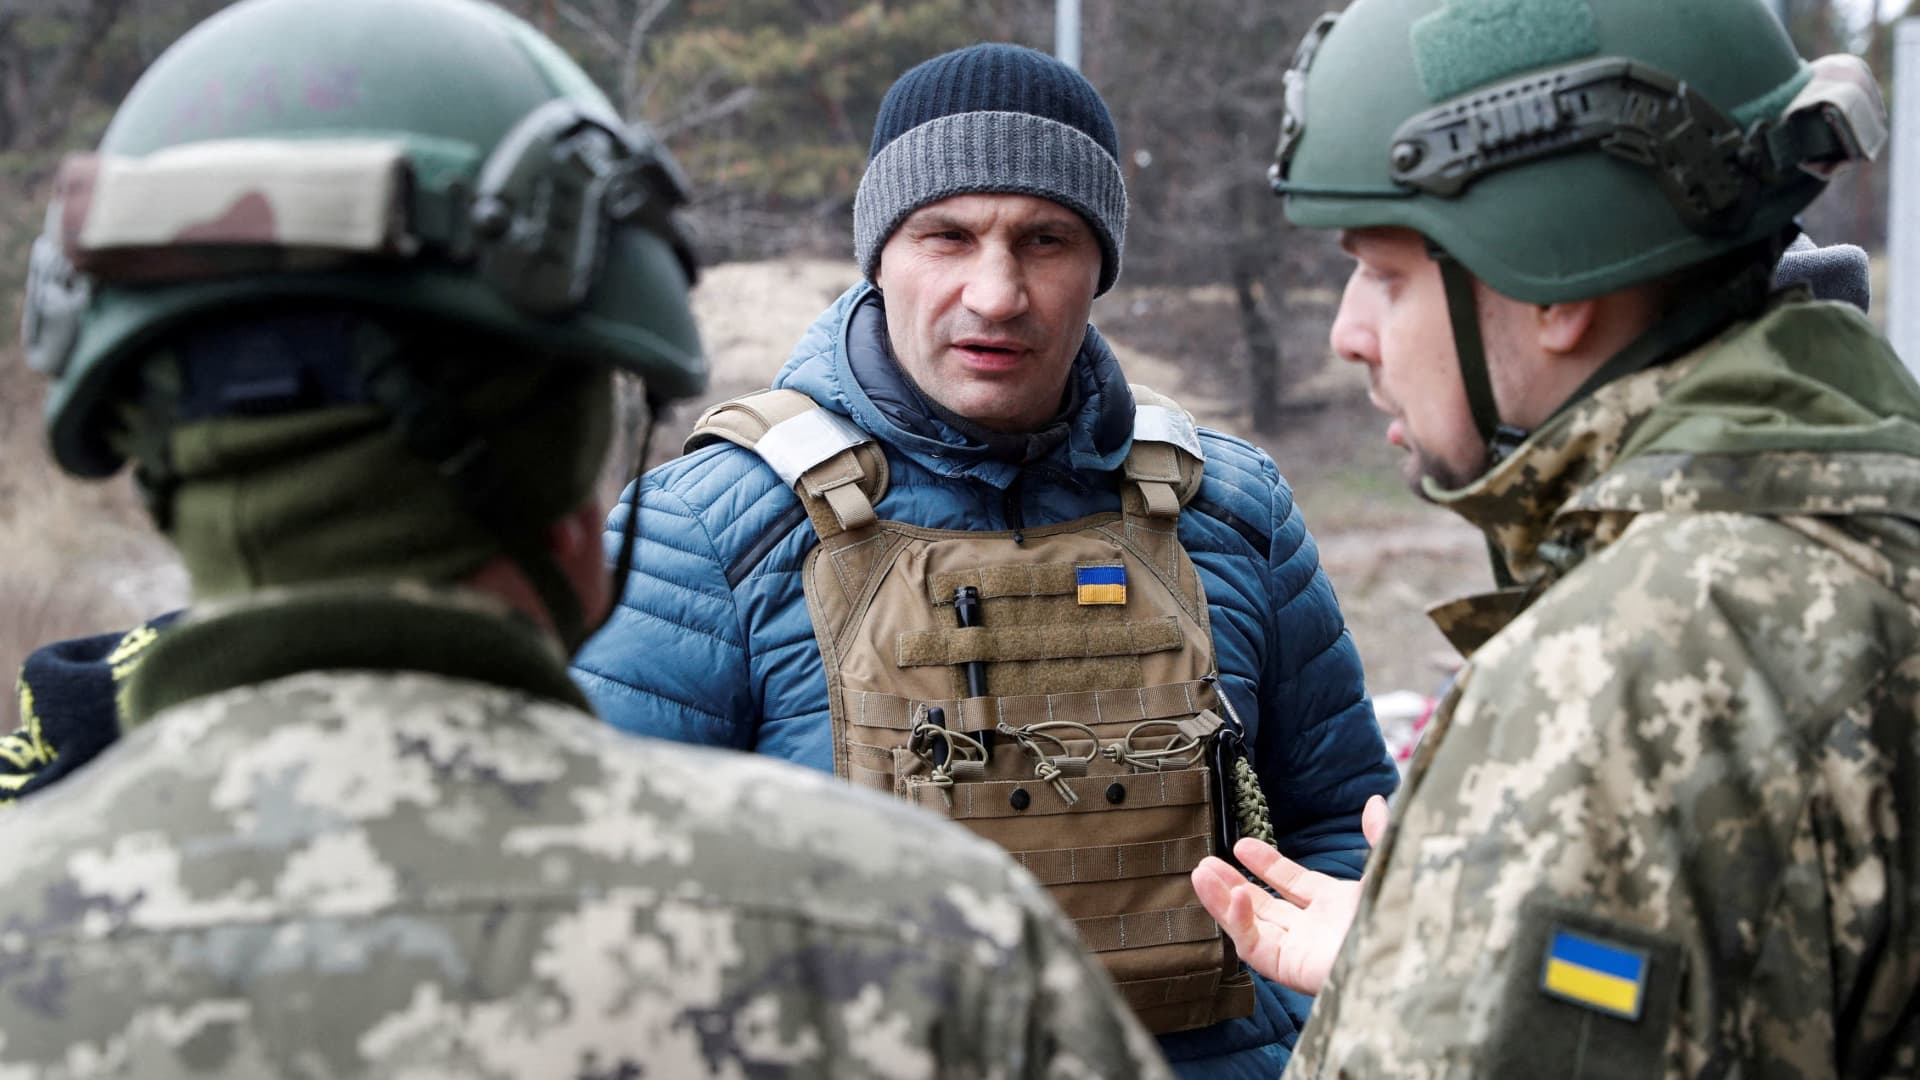 Mayor of Kyiv Vitali Klitschko visits a checkpoint of the Ukrainian Territorial Defense Forces, as Russia's invasion of Ukraine continues, in Kyiv, Ukraine March 6, 2022.